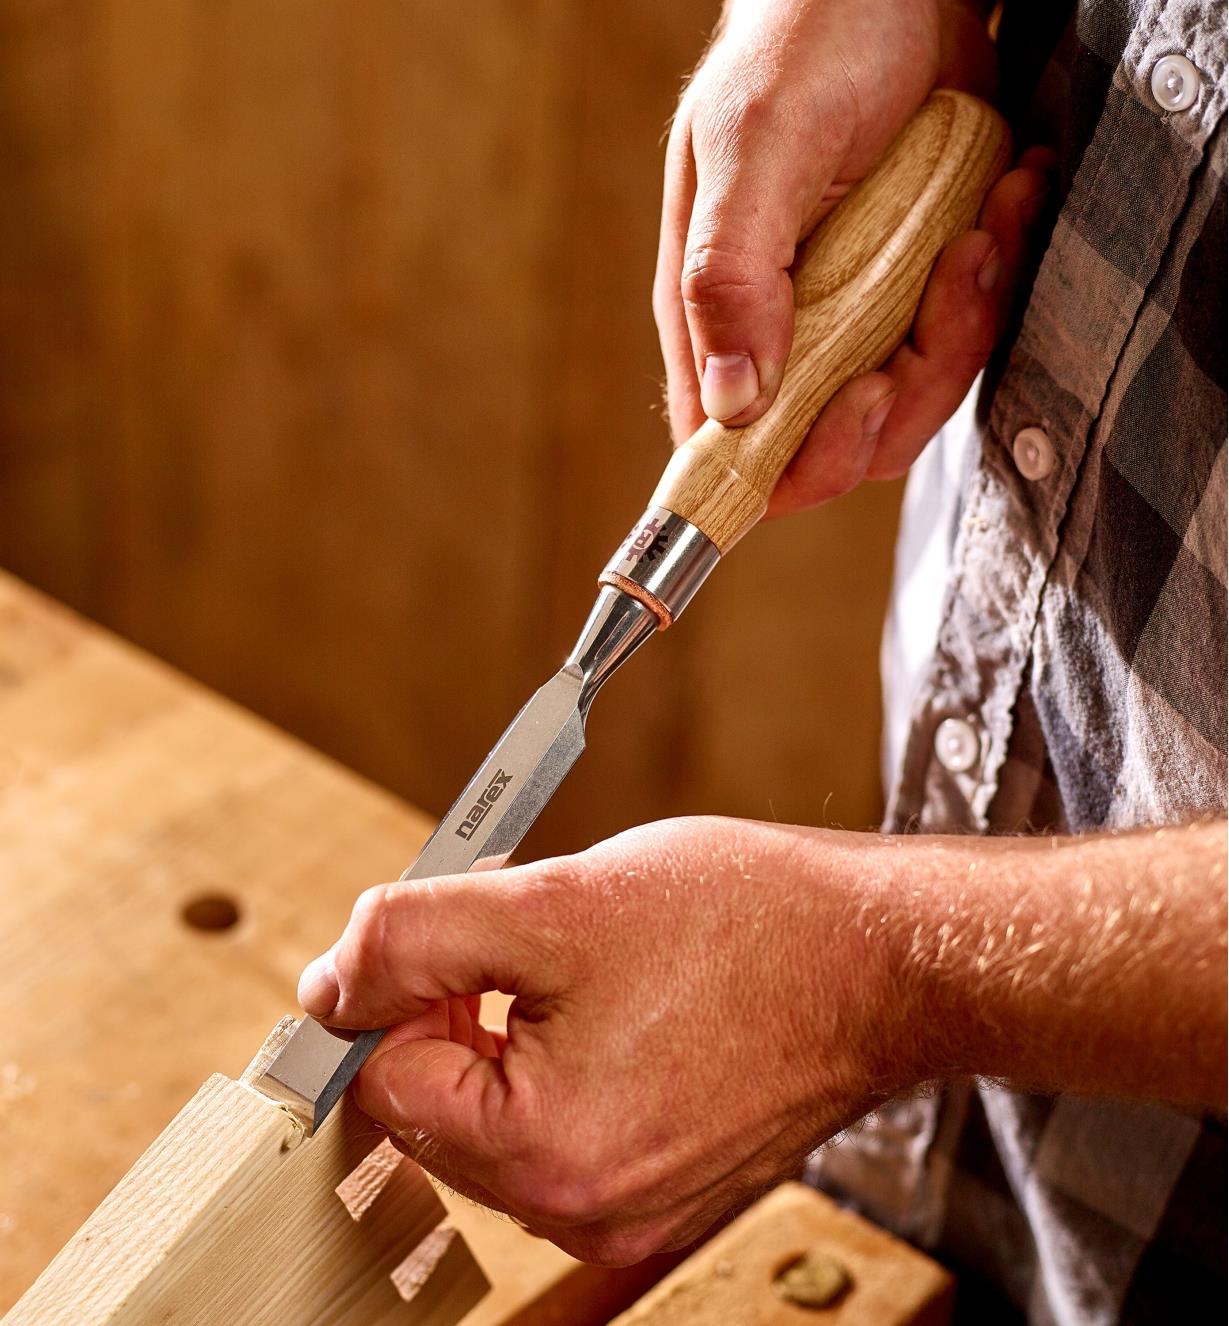 A woodworker uses a 3/4" Narex Richter chisel to trim the tails of a large dovetail joint